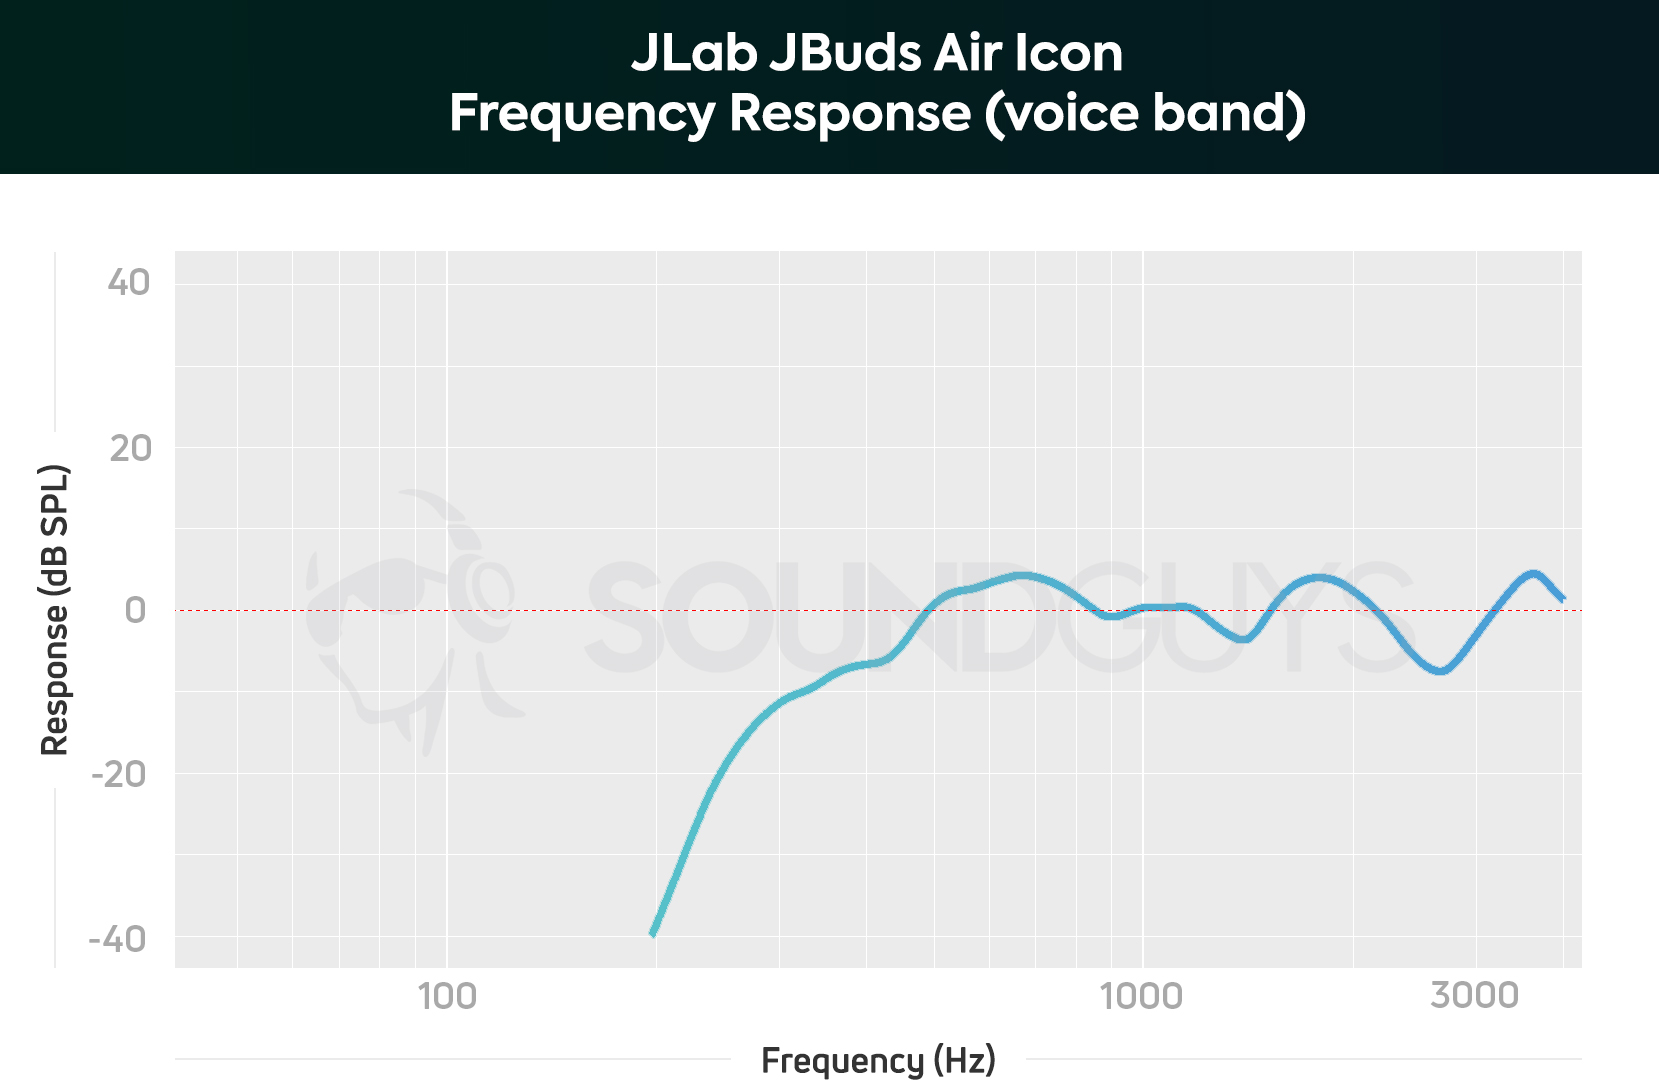 A chart depicting the JLab JBuds Air Icon microphone frequency response limited to the human voice.